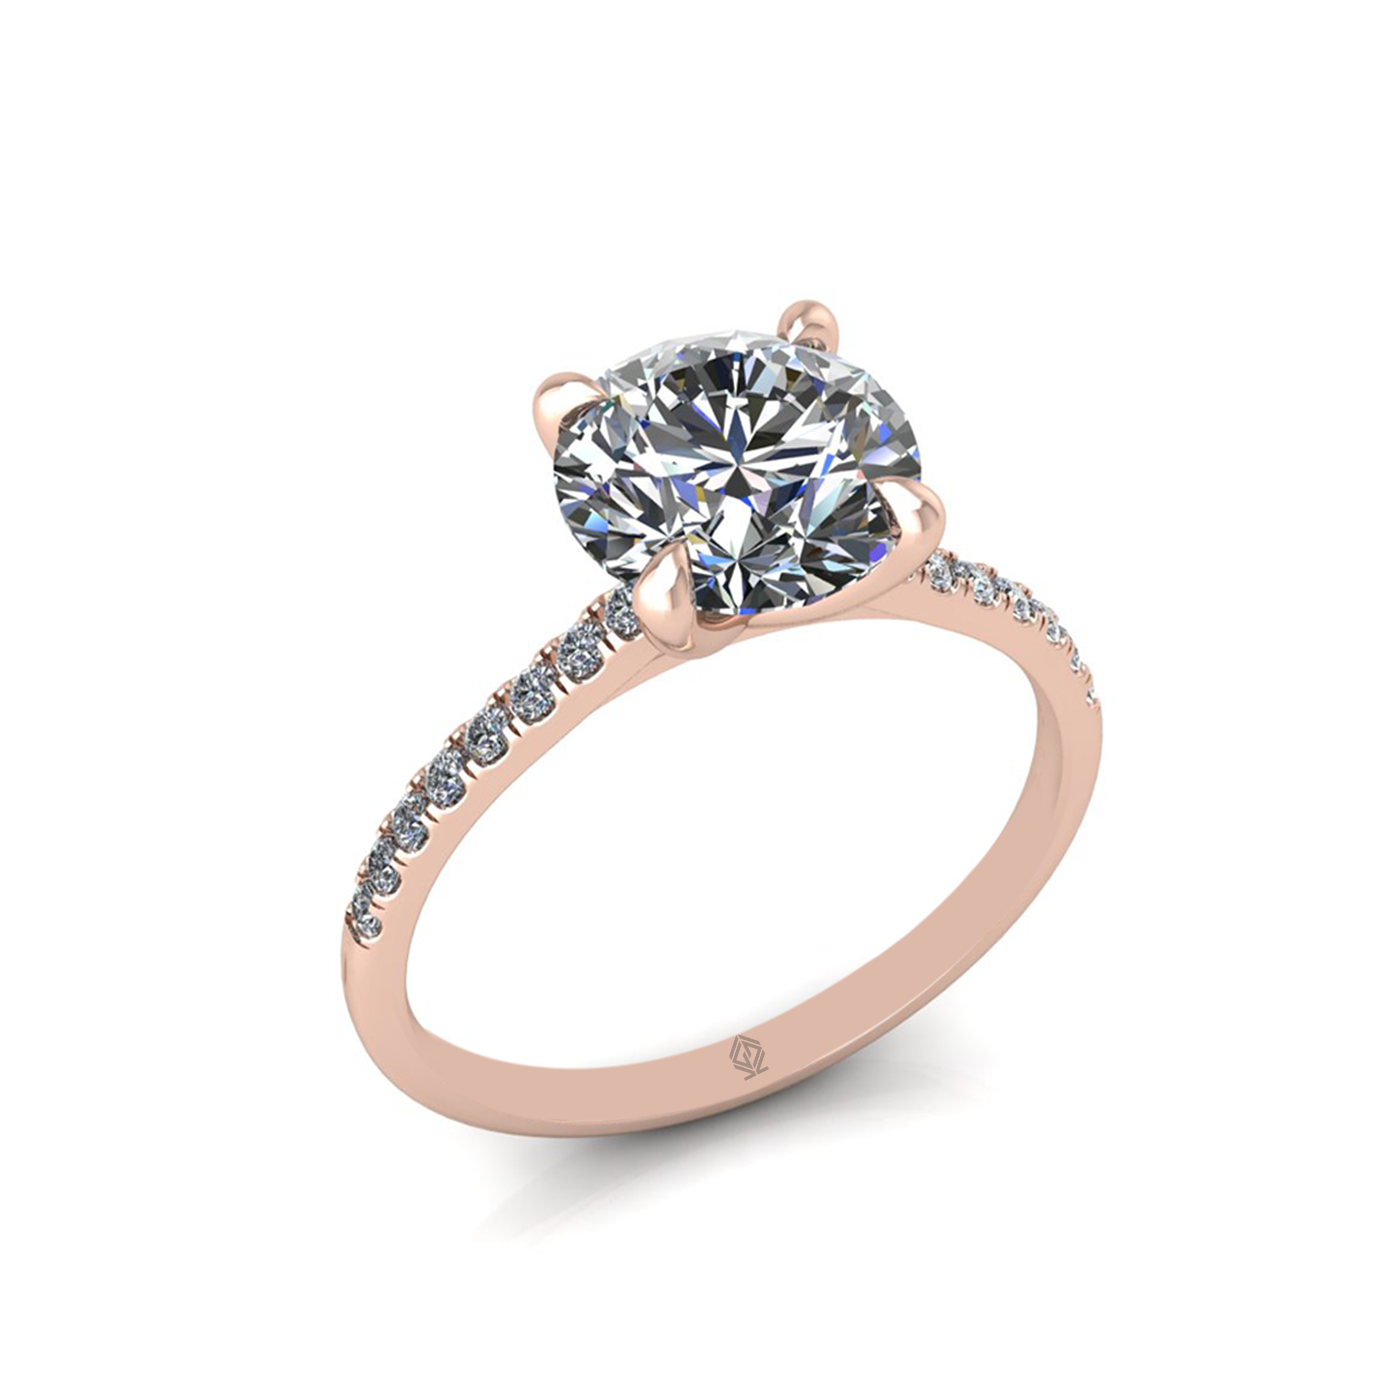 18k rose gold 2.0ct 4 prongs round cut diamond engagement ring with whisper thin pavÉ set band